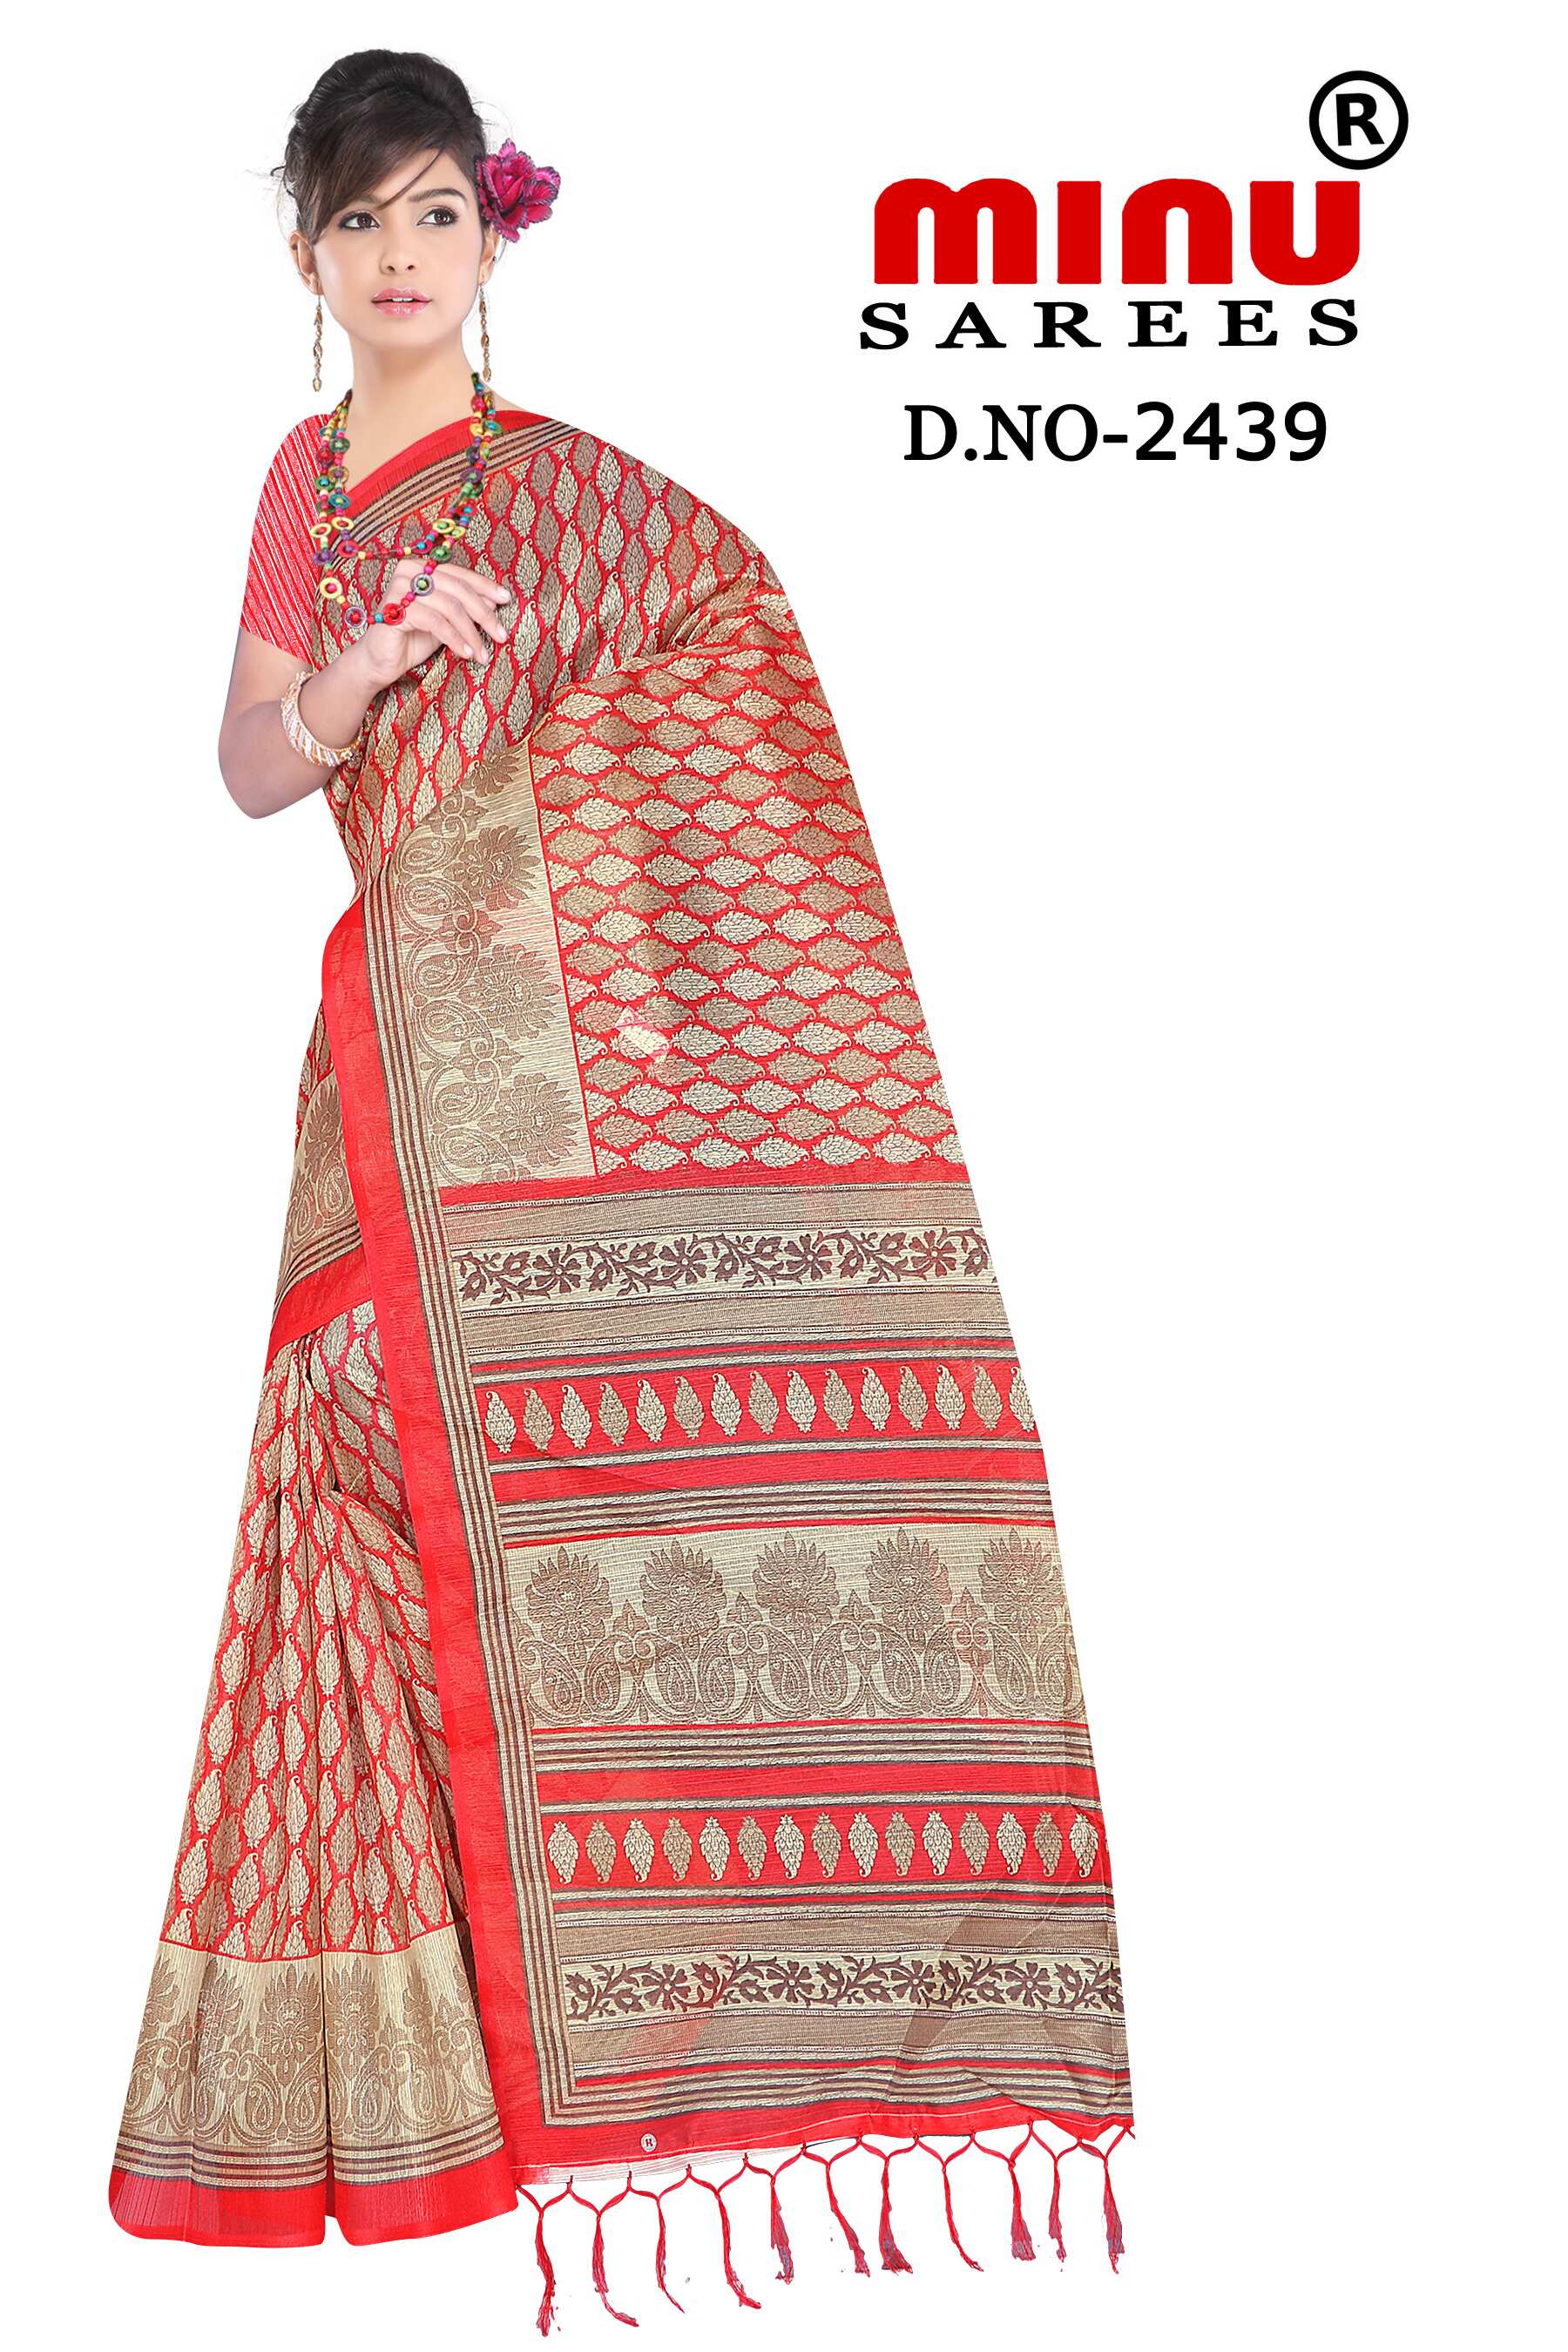 Woman wearing modern fancy sarees for retail